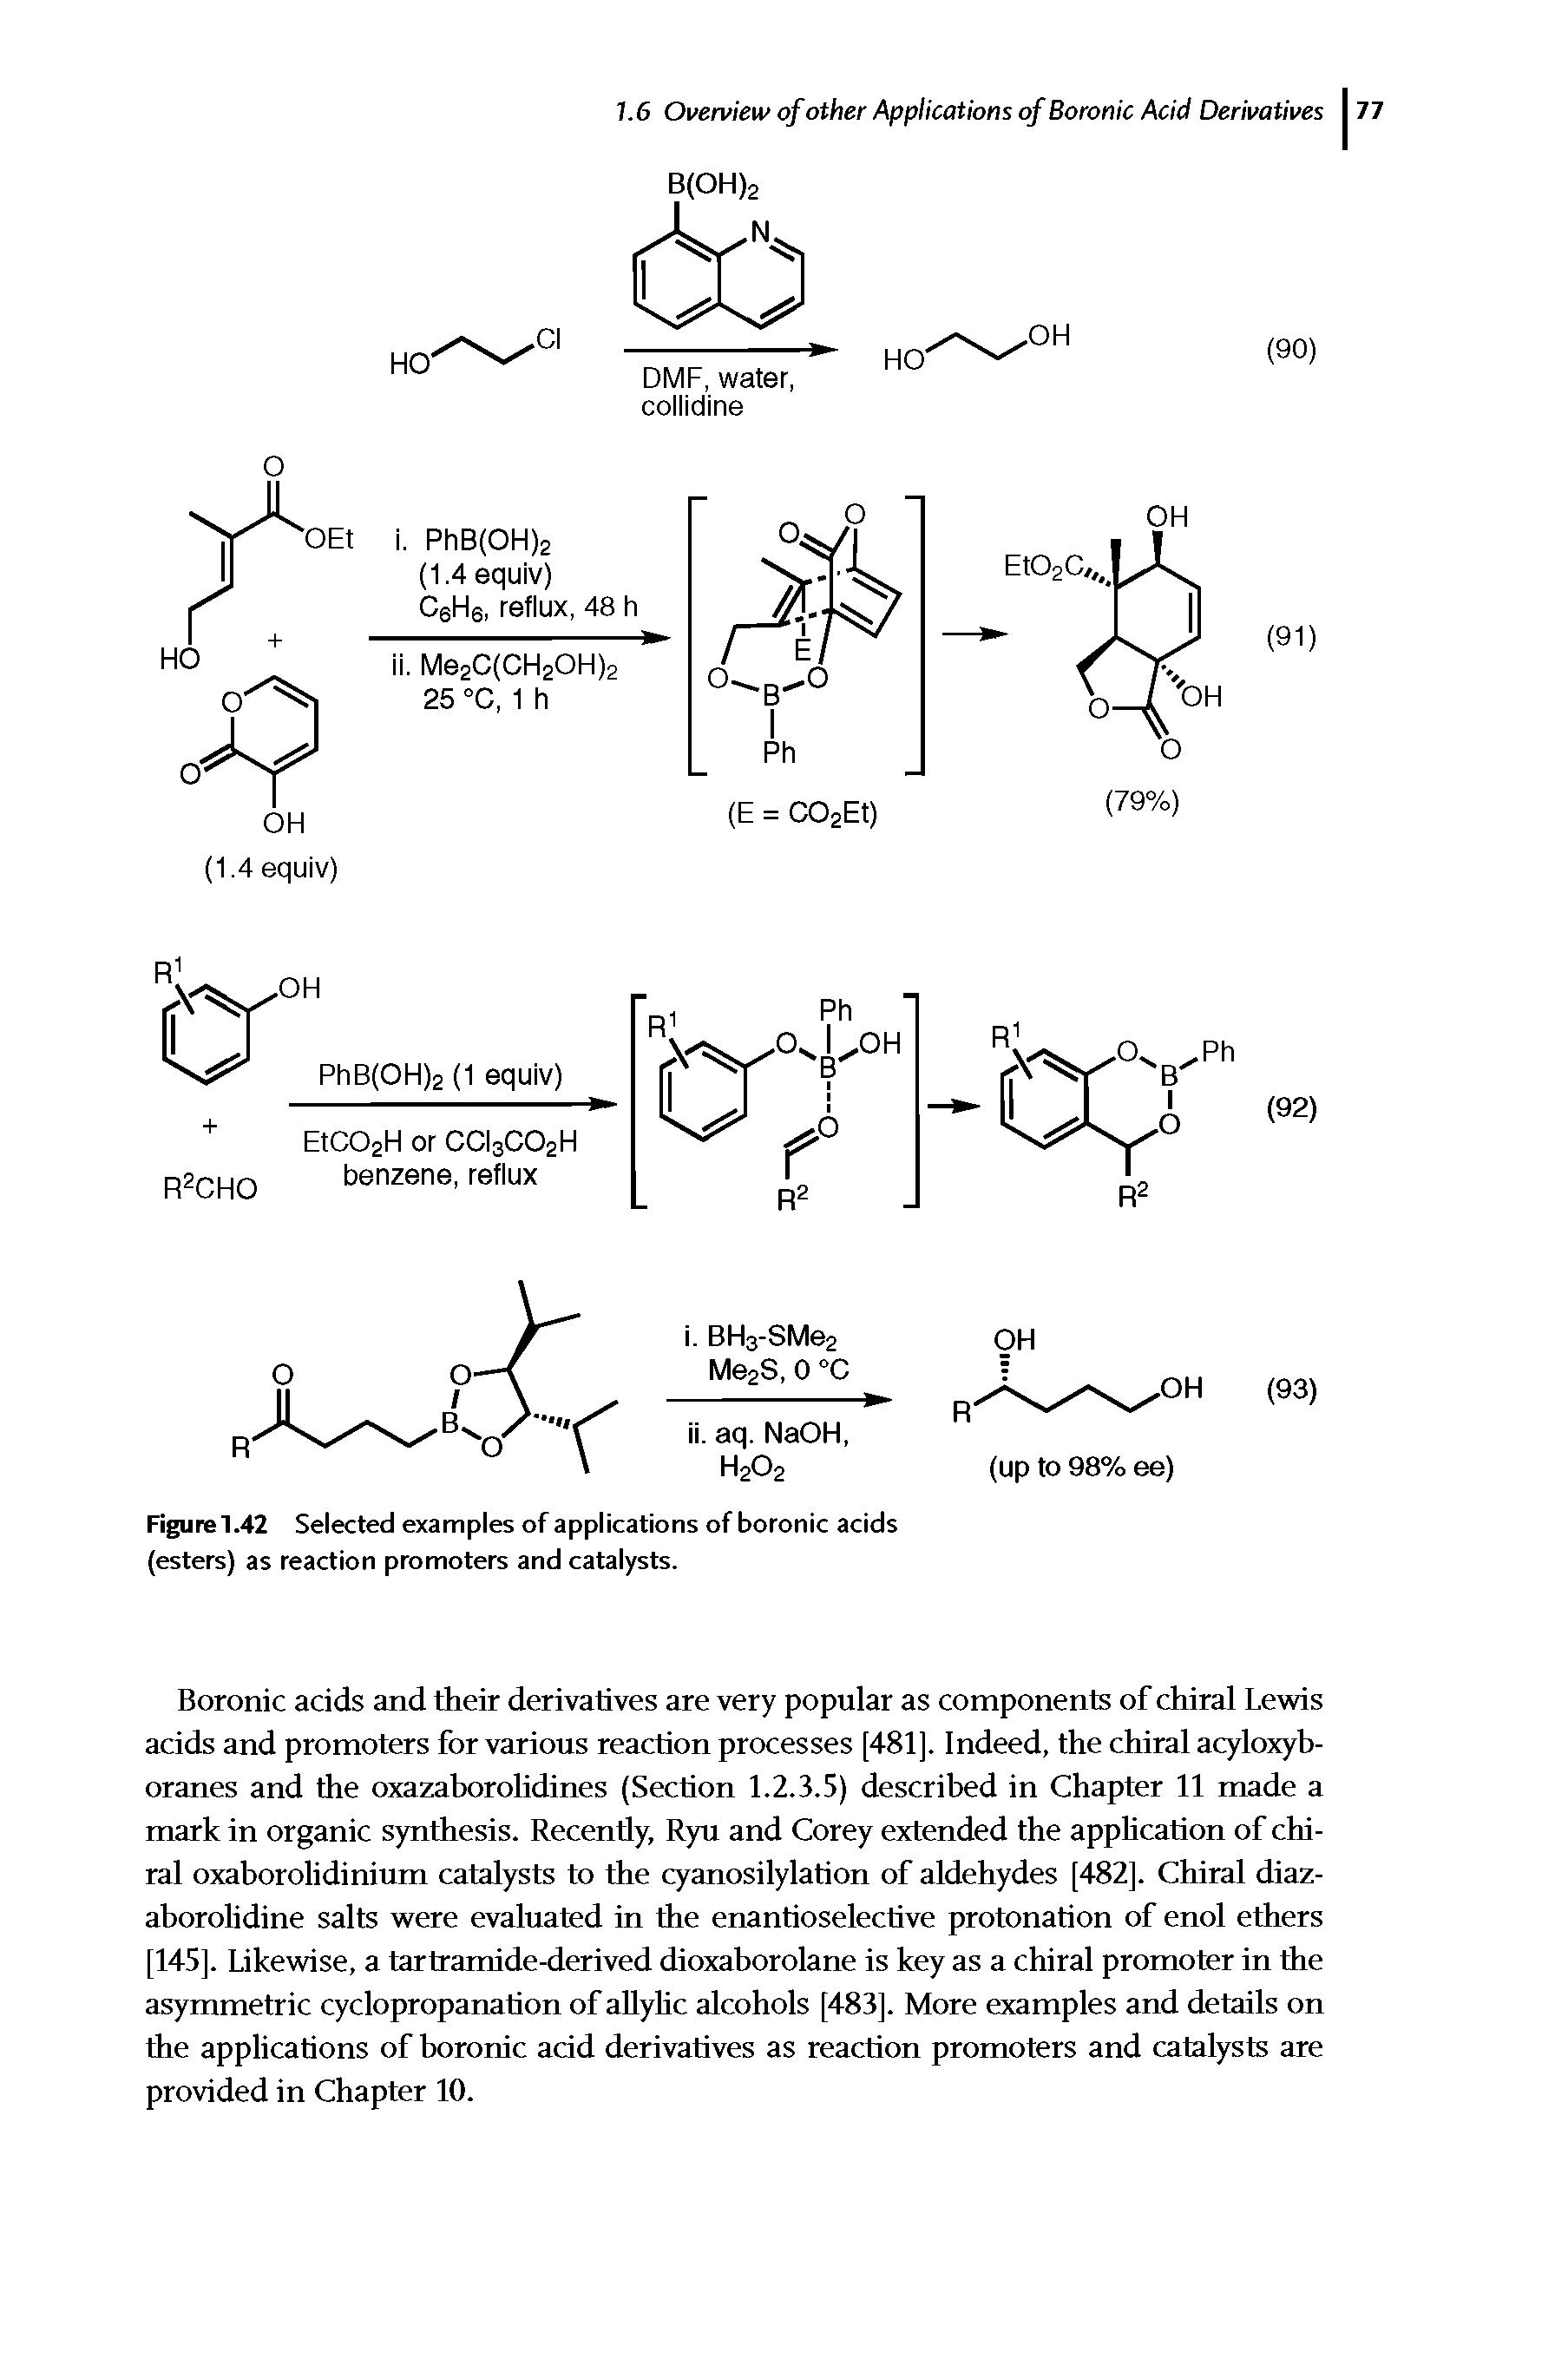 Figure1.42 Selected examples of applications of boronic acids (esters) as reaction promoters and catalysts.